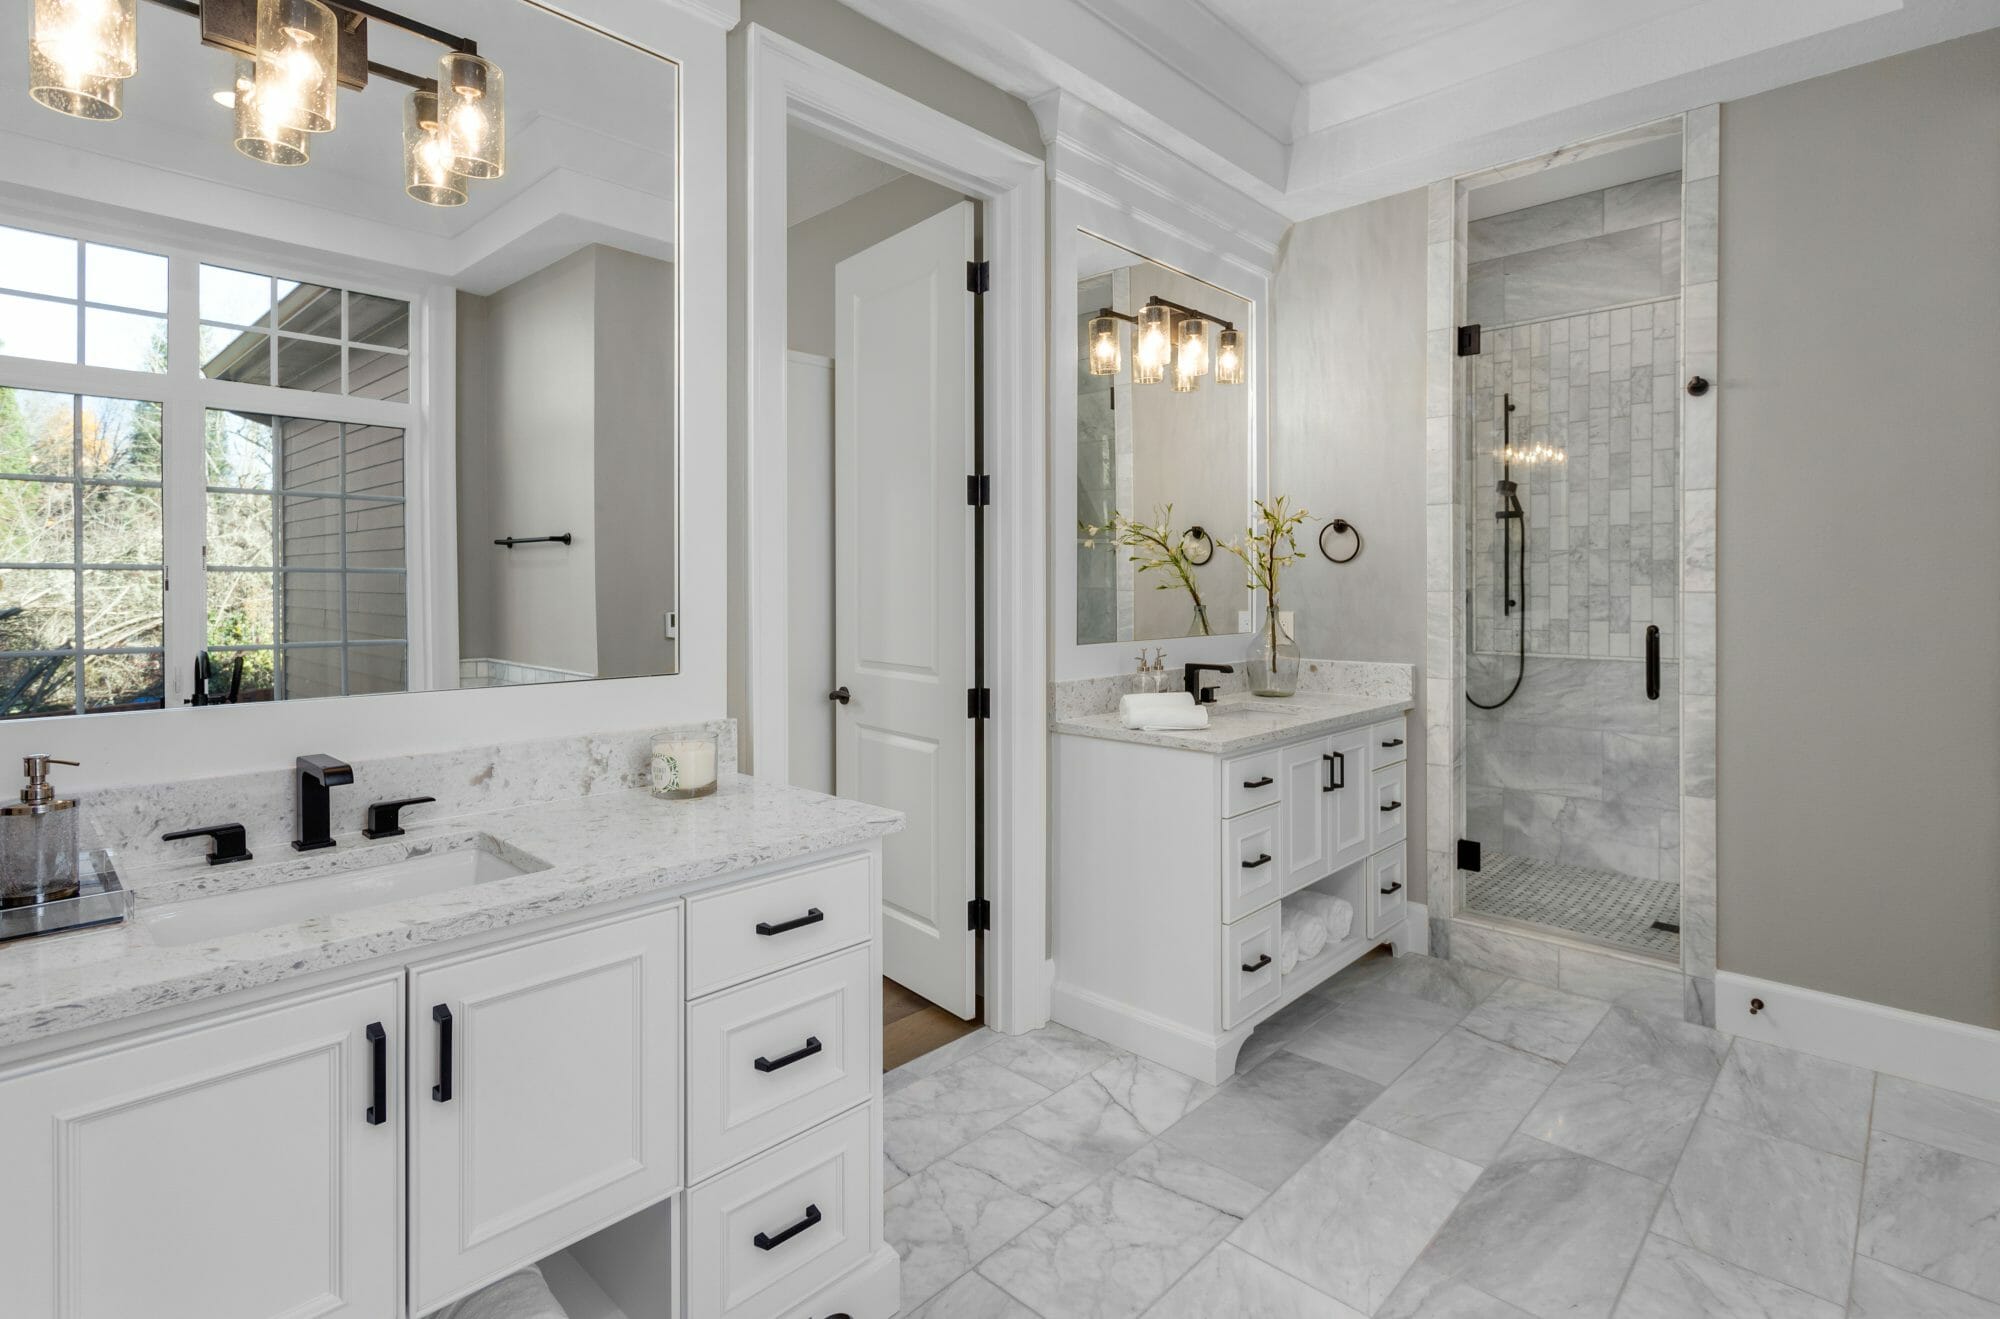 What You Need to Know About a One-Day Bathroom Remodel